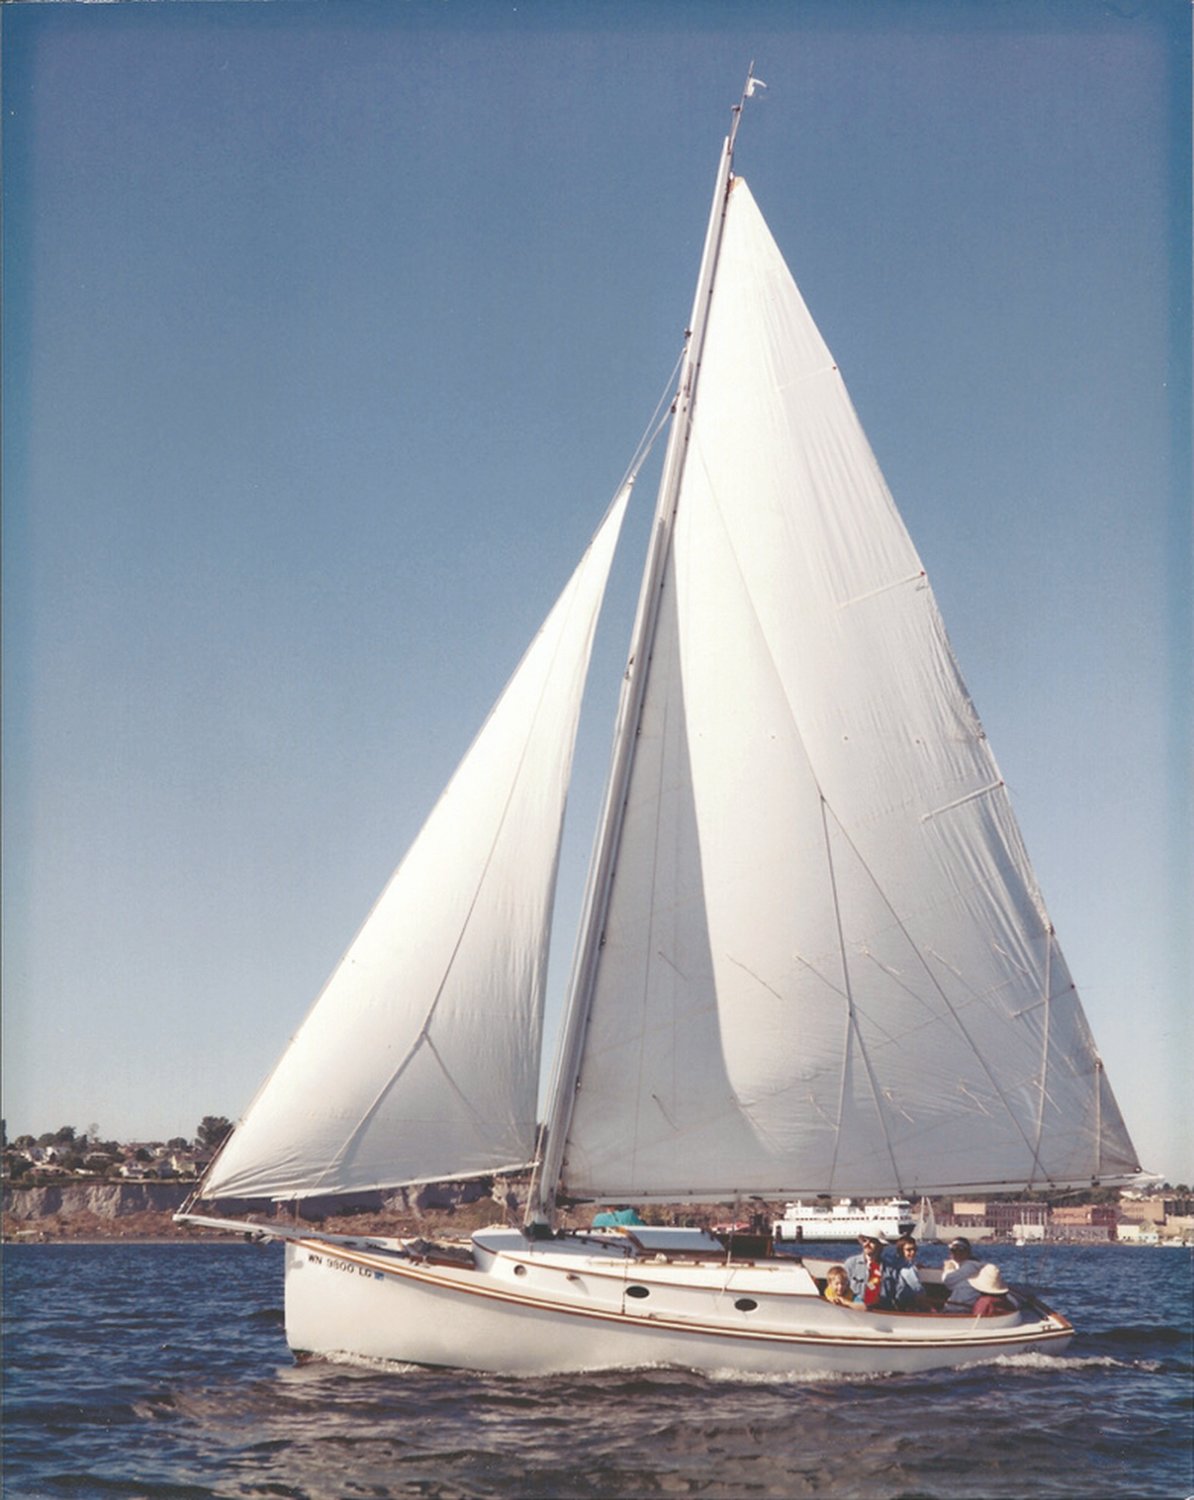 David King has spent his life building boats, from small wooden boats to mega yachts. He built the Alice, pictured above, 38 years ago, naming the craft after his wife.